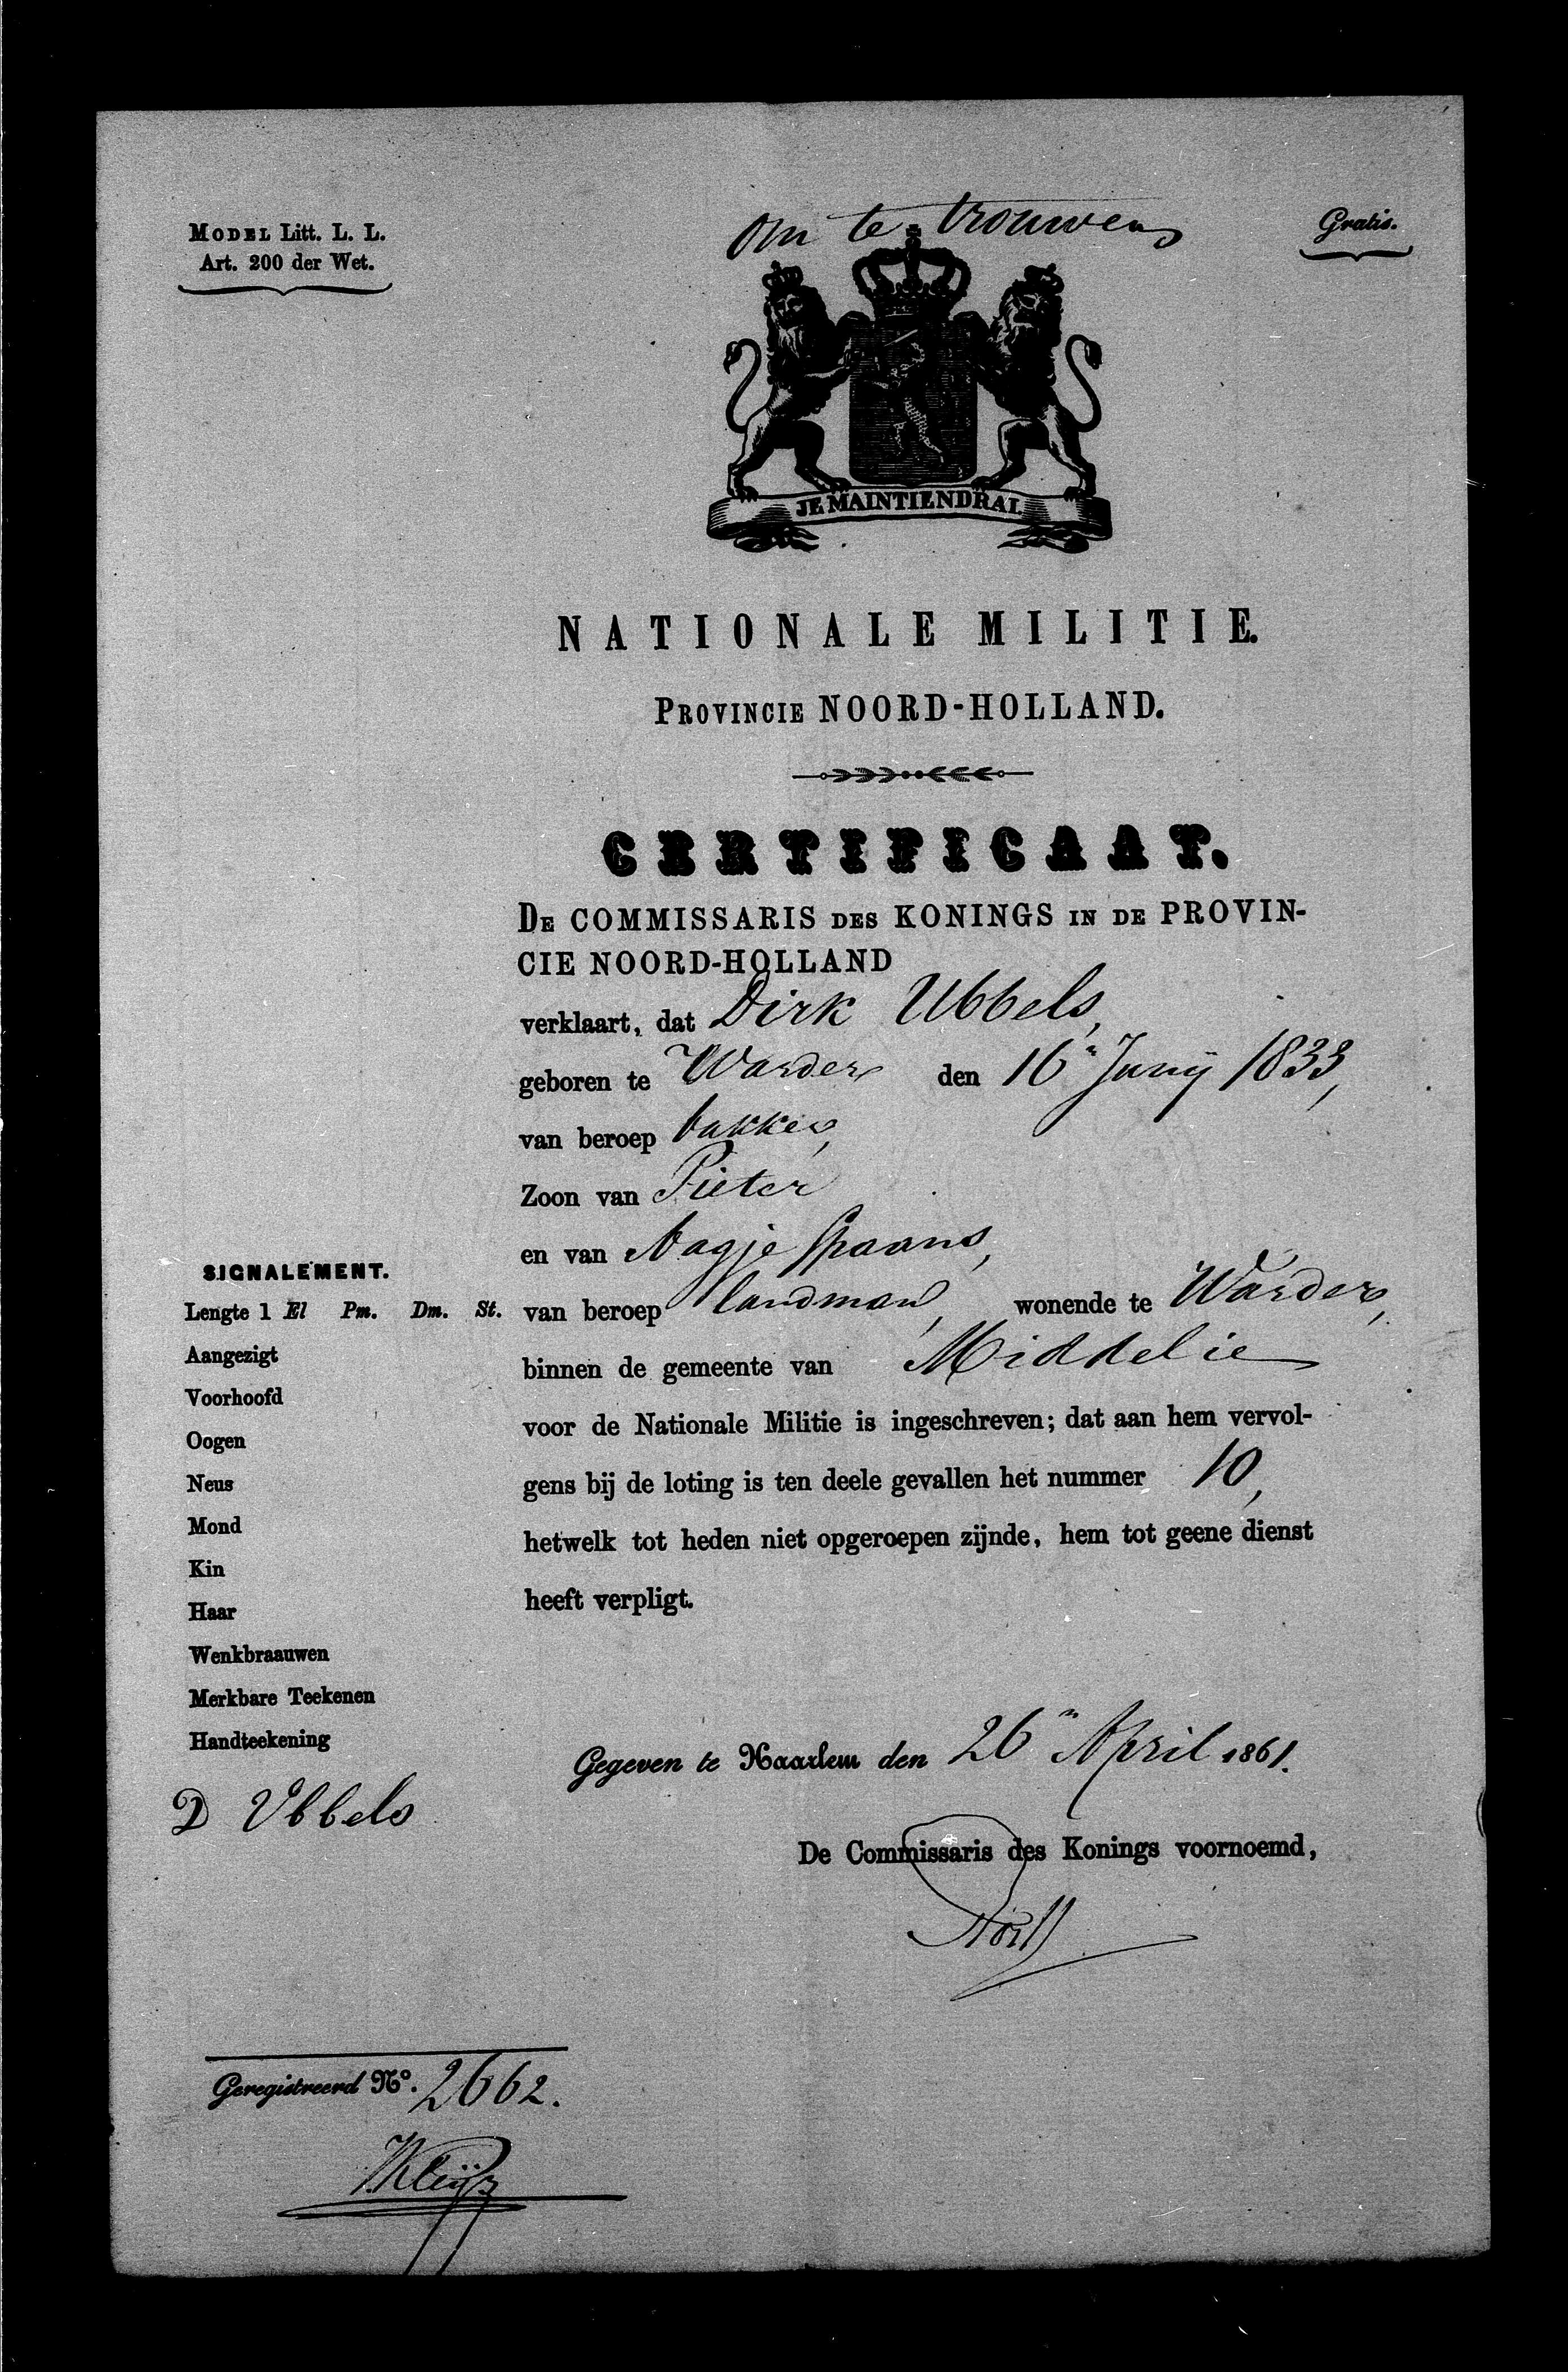 militieregister_nh_1861_ubbed1833.jpg